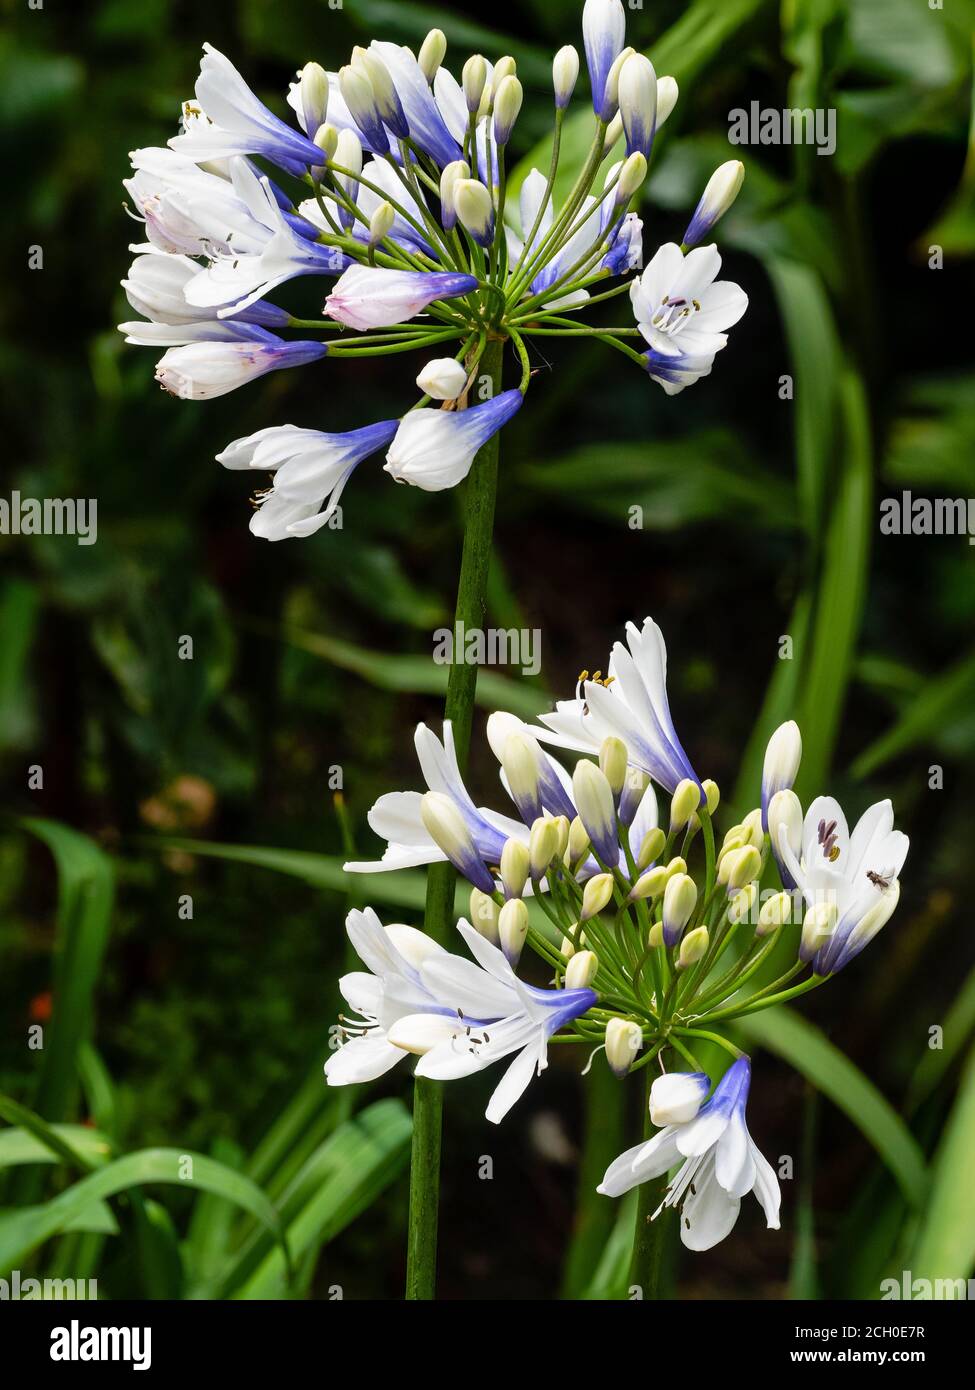 Blue and white tubular blooms in the flower heads of the hardy perennial Agapanthus 'Twister' Stock Photo